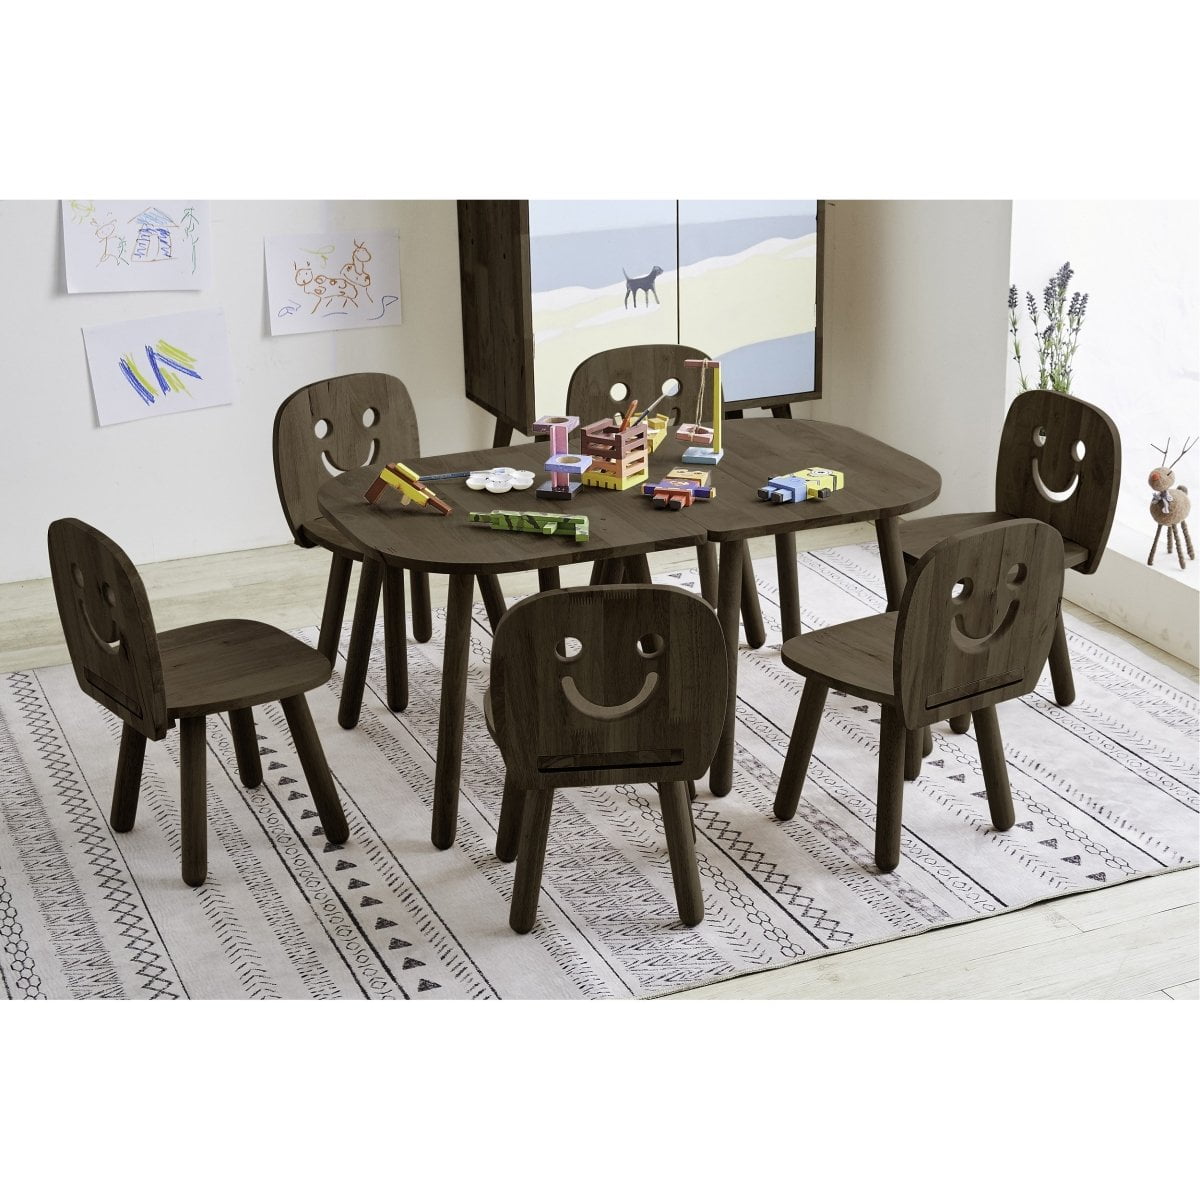 Smart Solid Wood 1 Dining/Study/Play Kids Table Col: Walnut (WIL-6514T) picket and rail